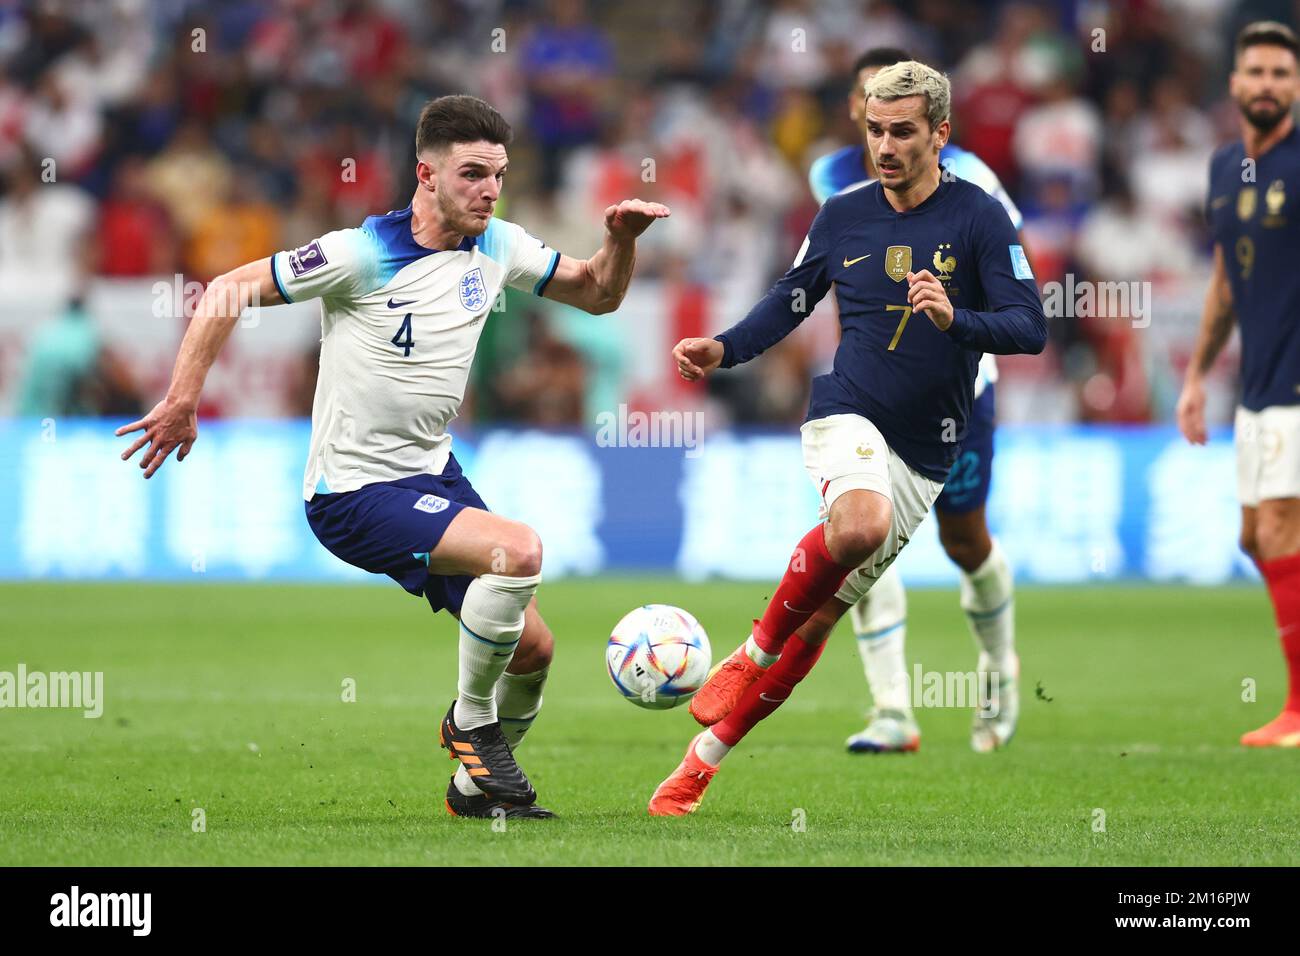 Al Khor, Qatar. 10th Dec, 2022. Declan Rice (L) of England in action with Antoine Griezmann of France during the 2022 FIFA World Cup Quarter-Final match at Al Bayt Stadium in Al Khor, Qatar on December 10, 2022. Photo by Chris Brunskill/UPI Credit: UPI/Alamy Live News Stock Photo